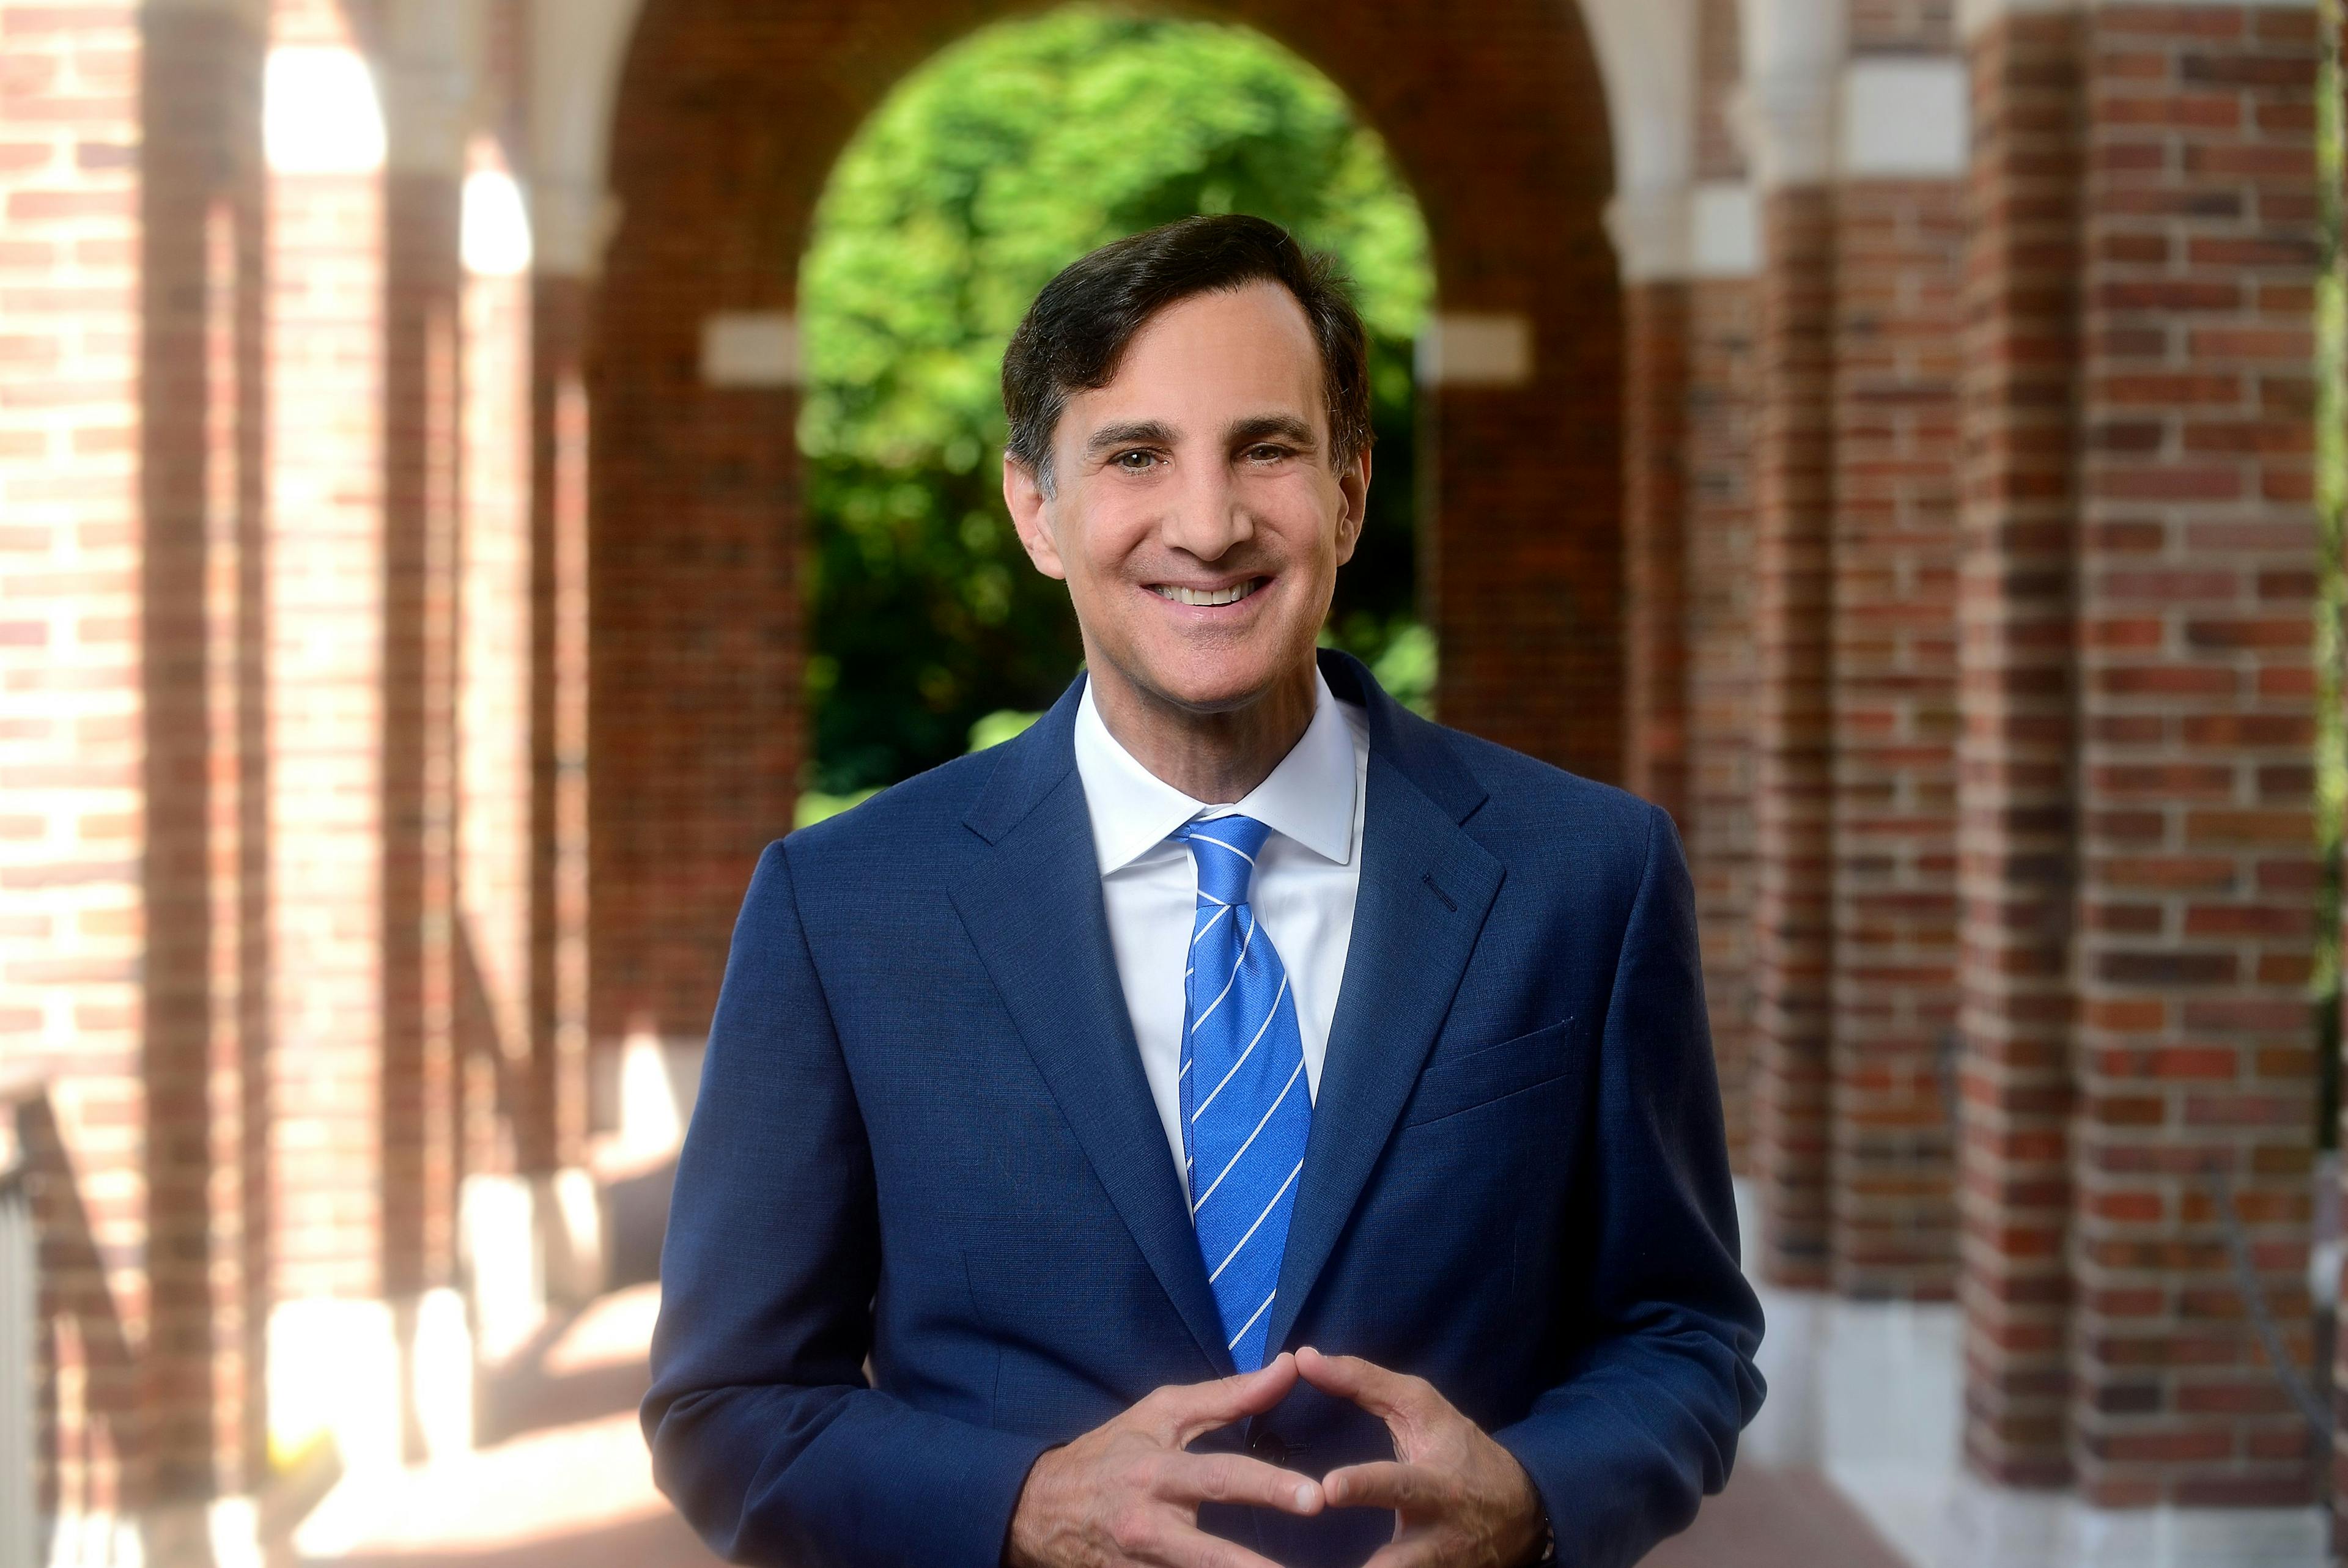 Ron Daniels, president of Johns Hopkins University, says the Supreme Court's ruling on affirmative action jeopardizes progress in improving diversity. (Photo: Johns Hopkins University)